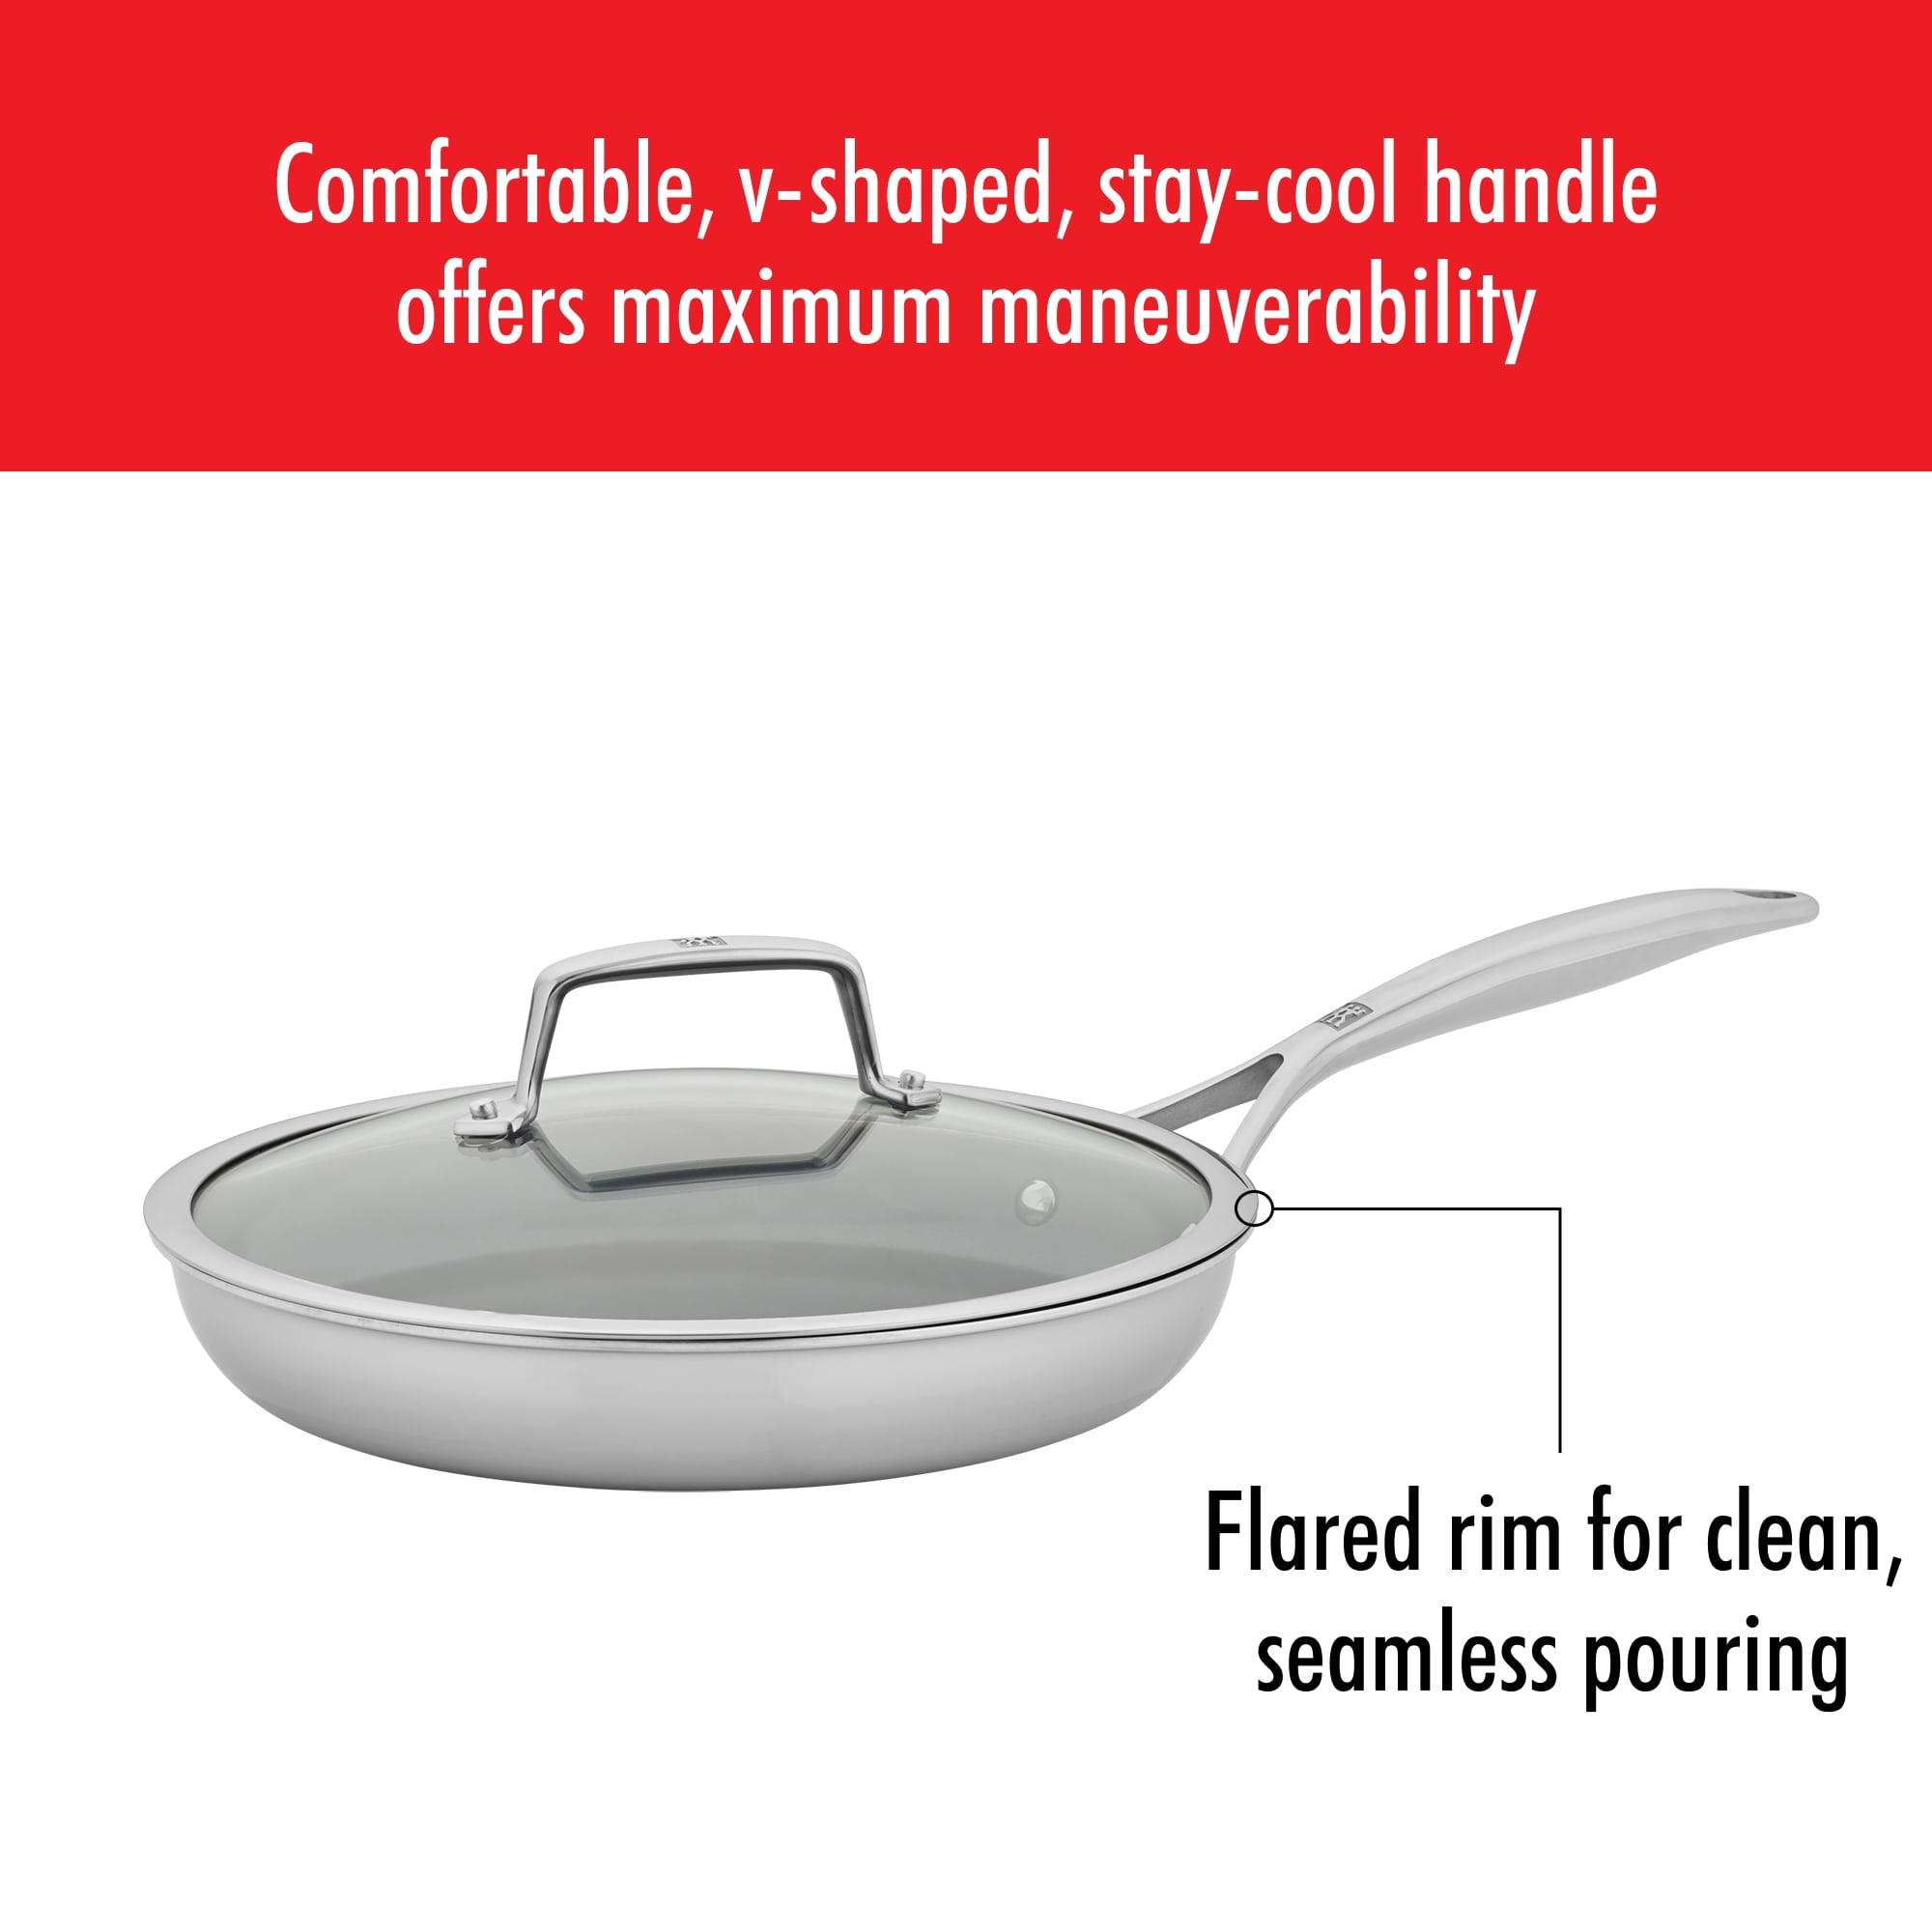 ZWILLING Energy Plus 8-inch Stainless Steel Ceramic Nonstick Fry Pan, 8-inch  - Kroger